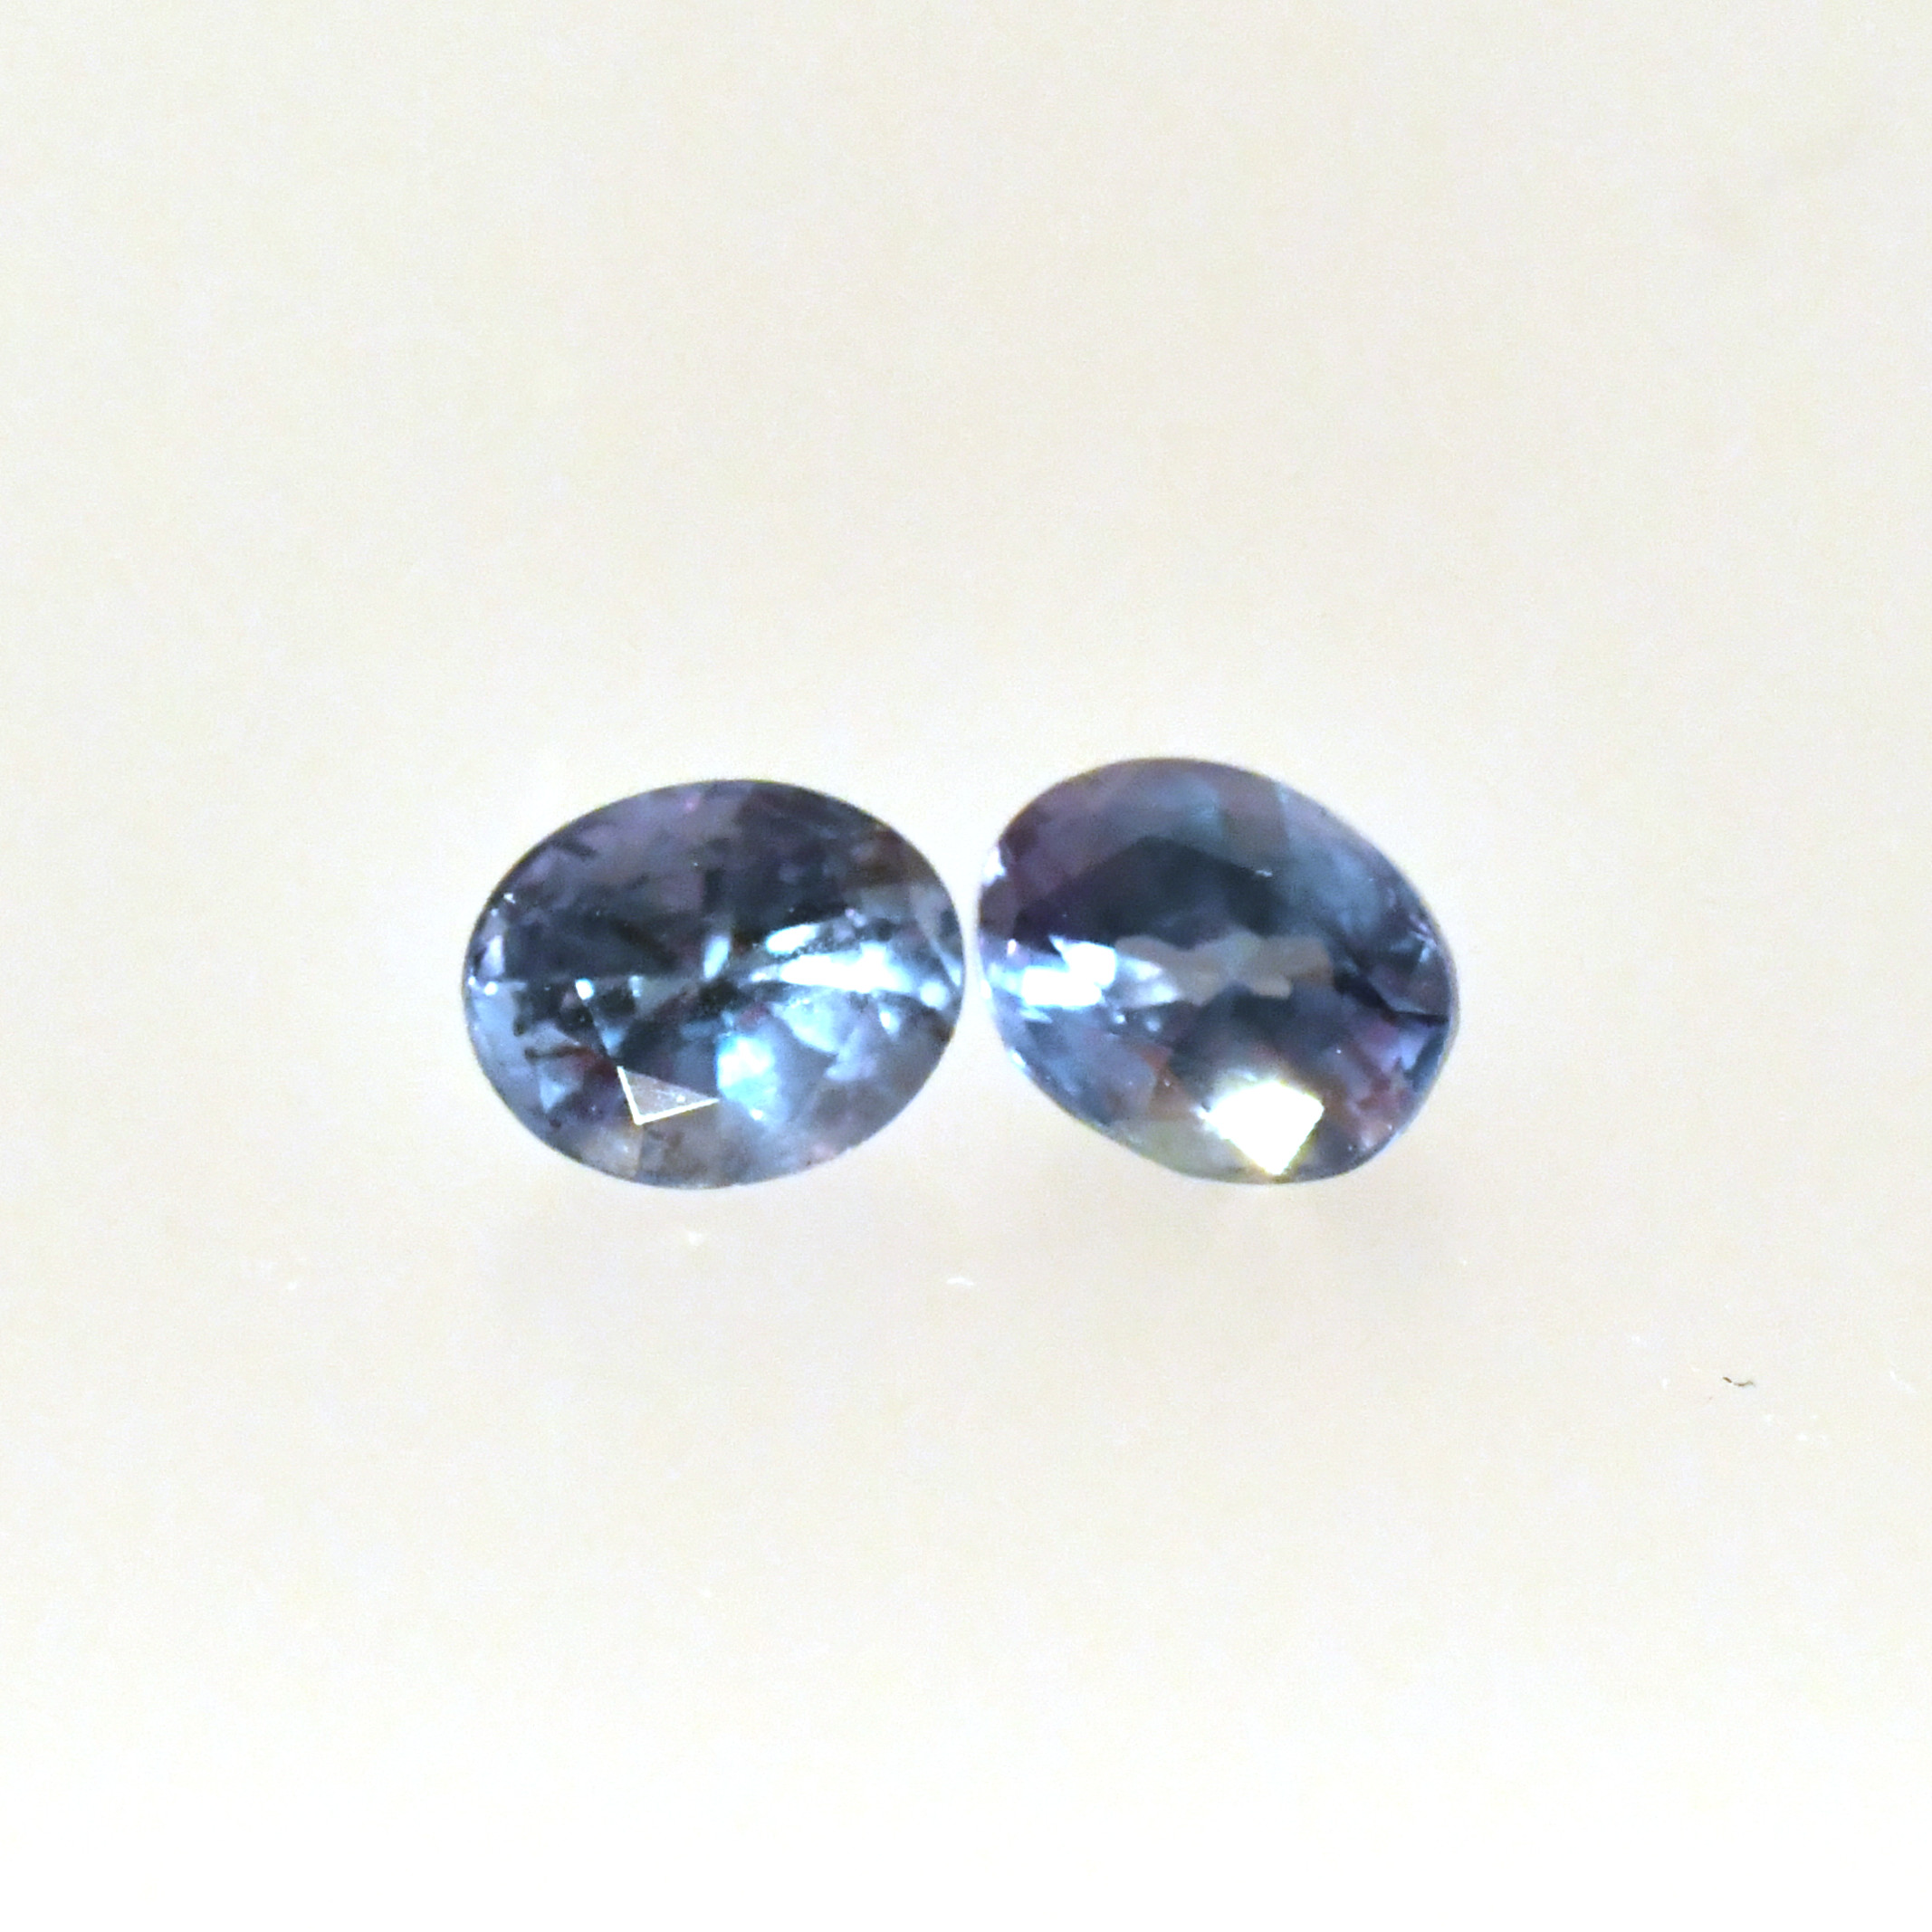 Gemstones-Natural Color Change Alexandrite Oval 5x4mm Matching Pair ...